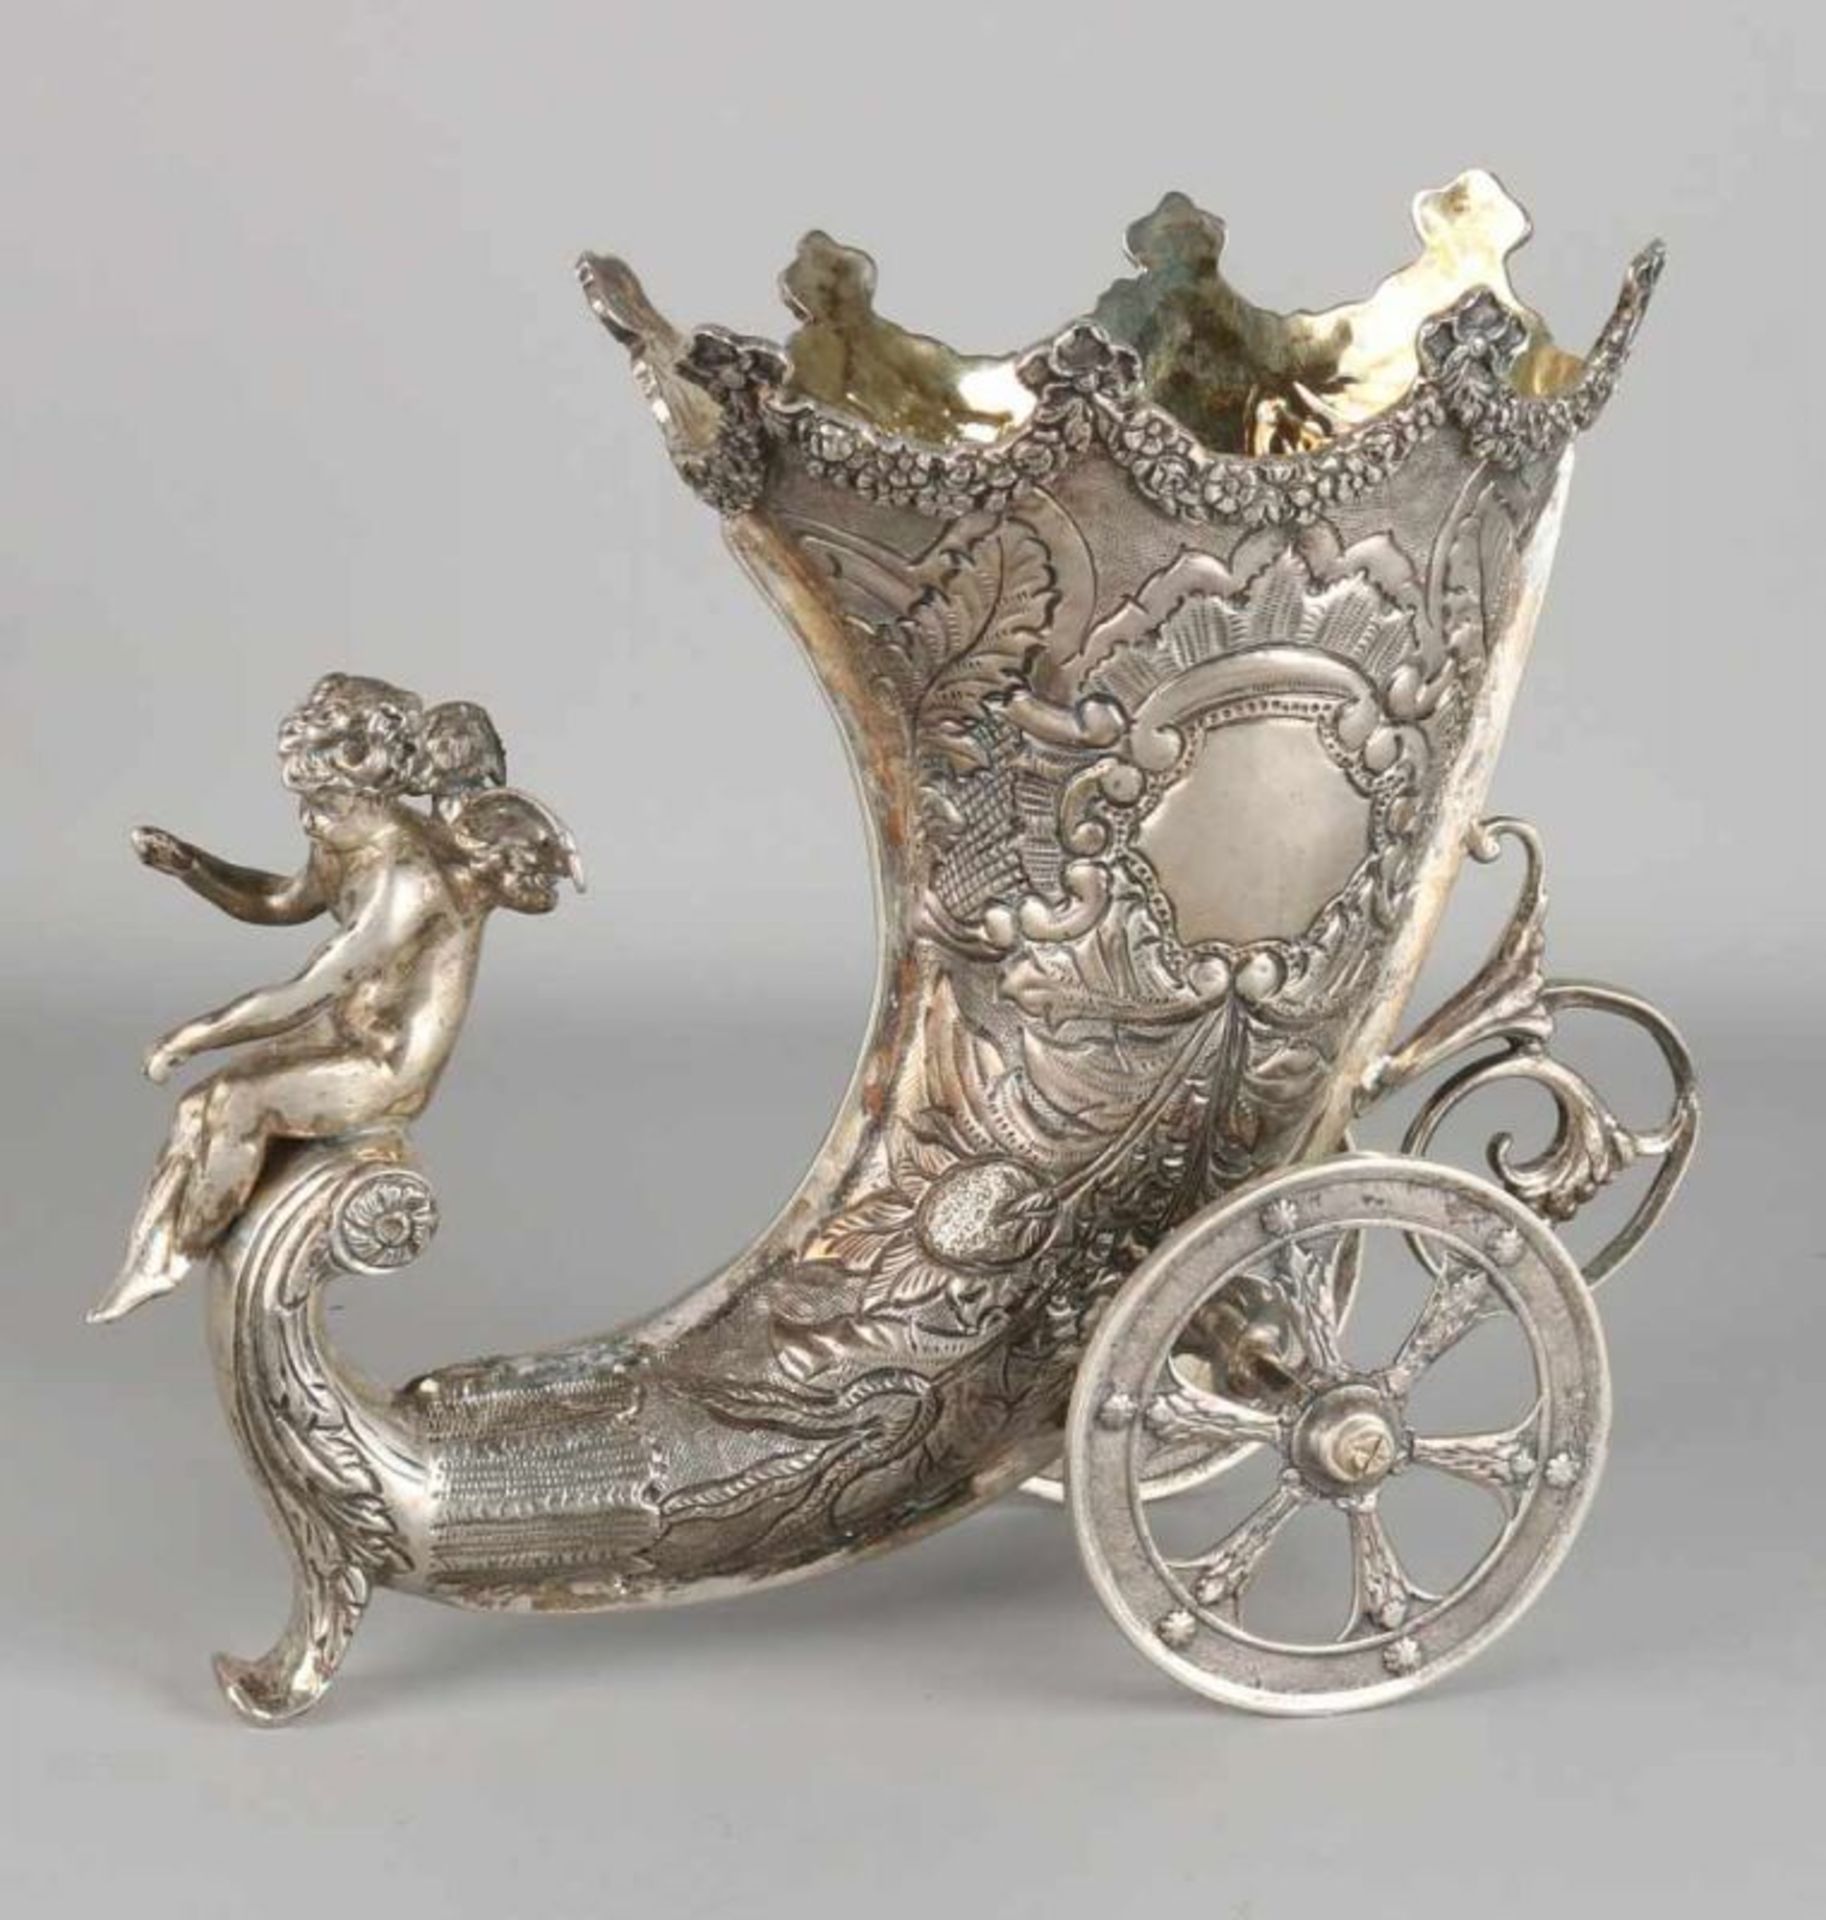 Impressive silver table piece, 925/000, a car in the shape of a cornucopia adorned with floral